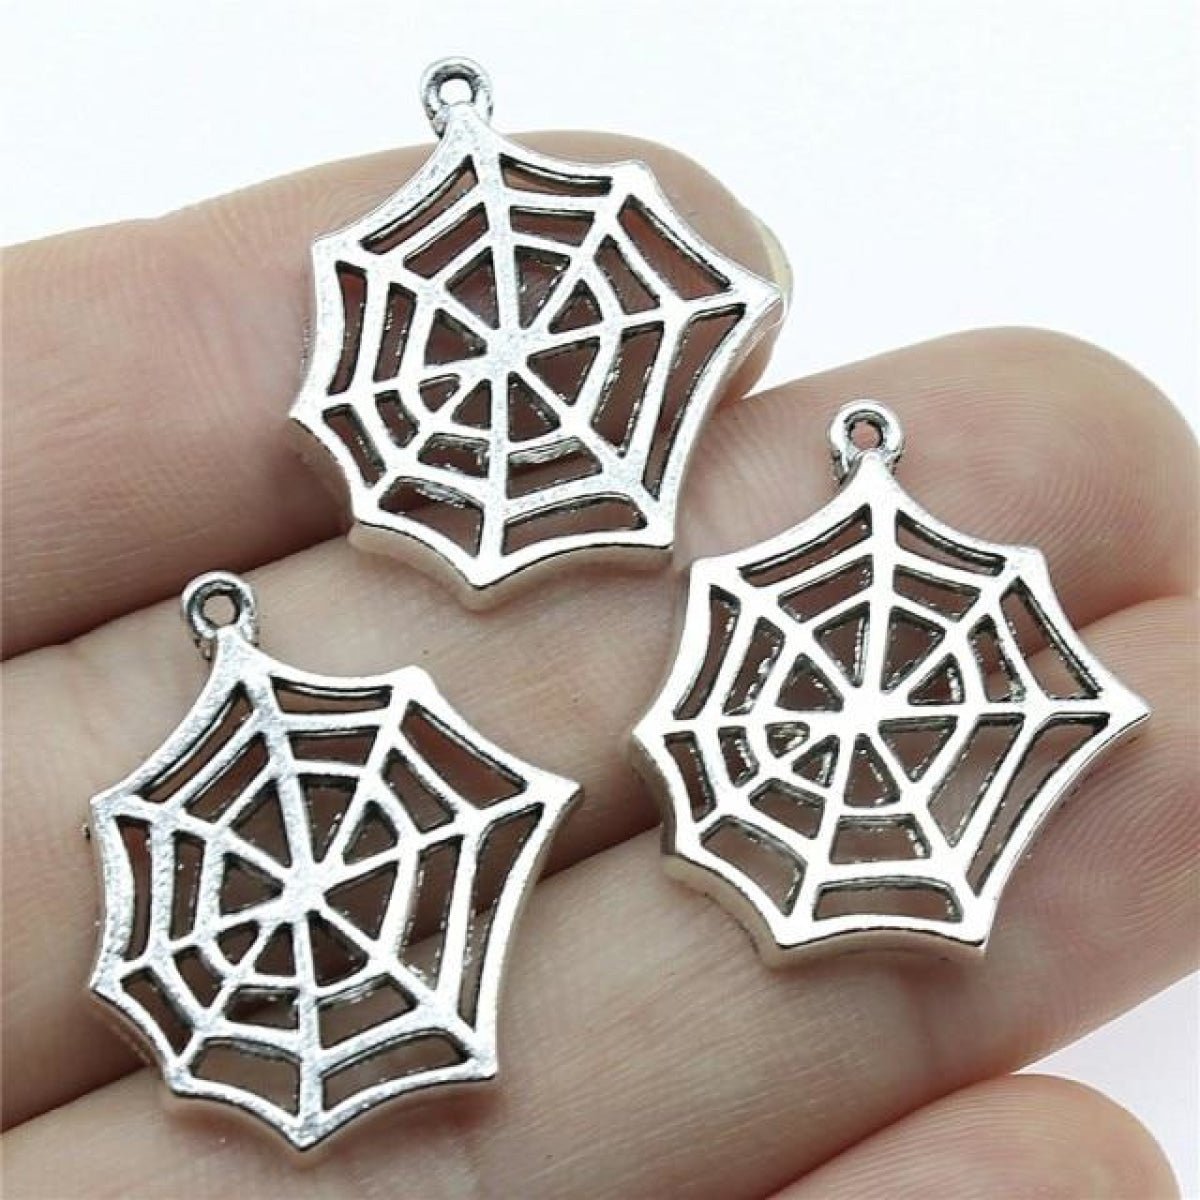 4pcs Spider Charms Antique Silver Colour Spider Charms Pendants For Bracelets Spider Cobweb Charms Making Jewellery - F - - Asia Sell